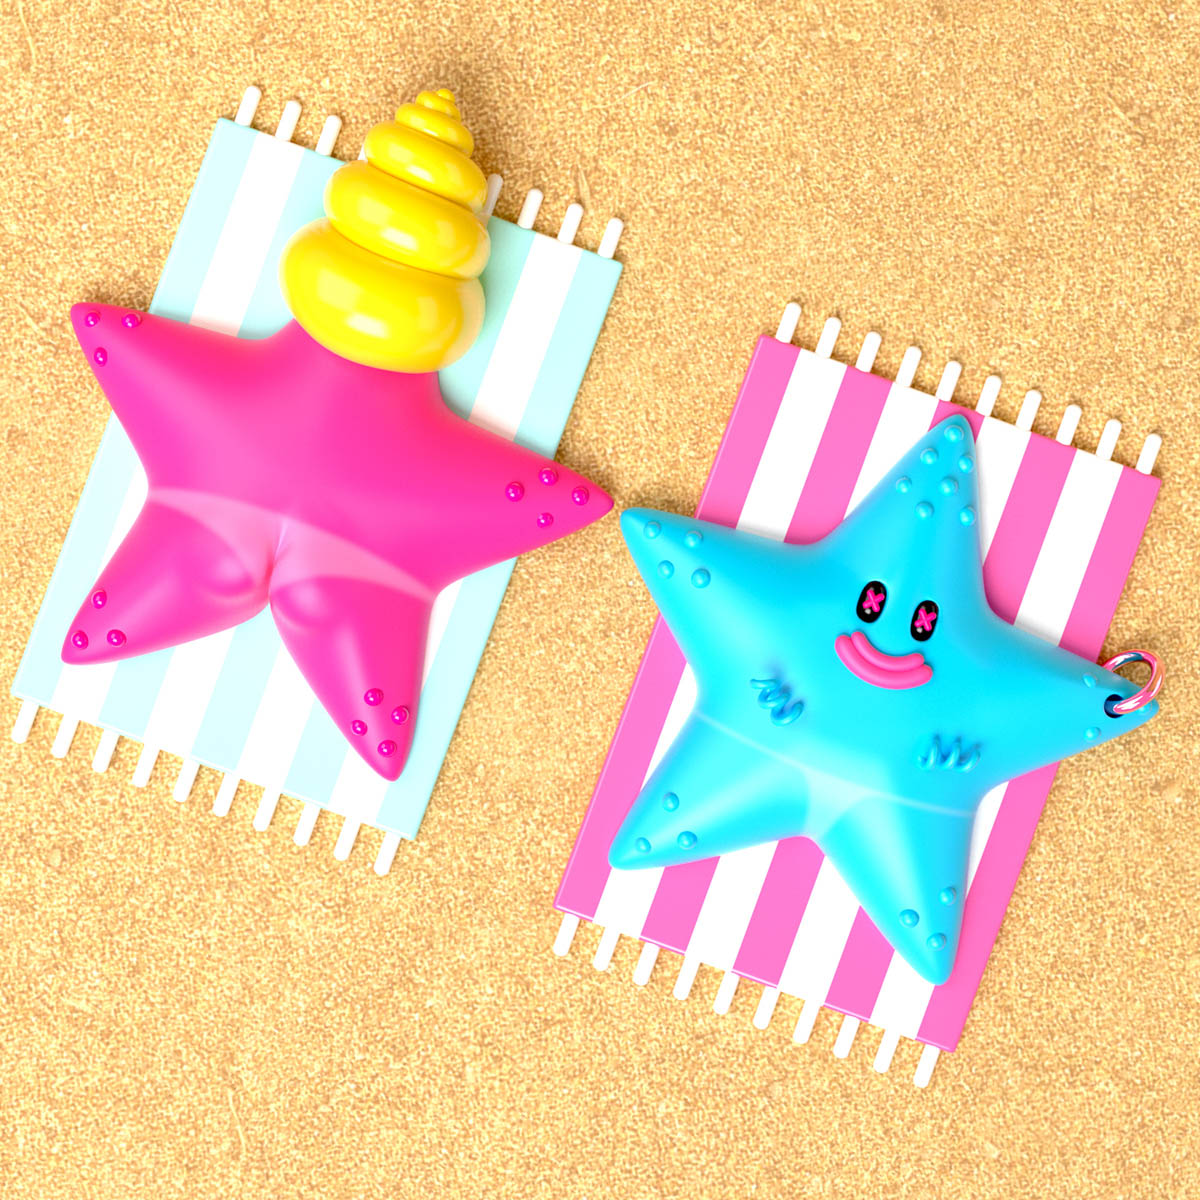 starfish 3d models by nikopicto